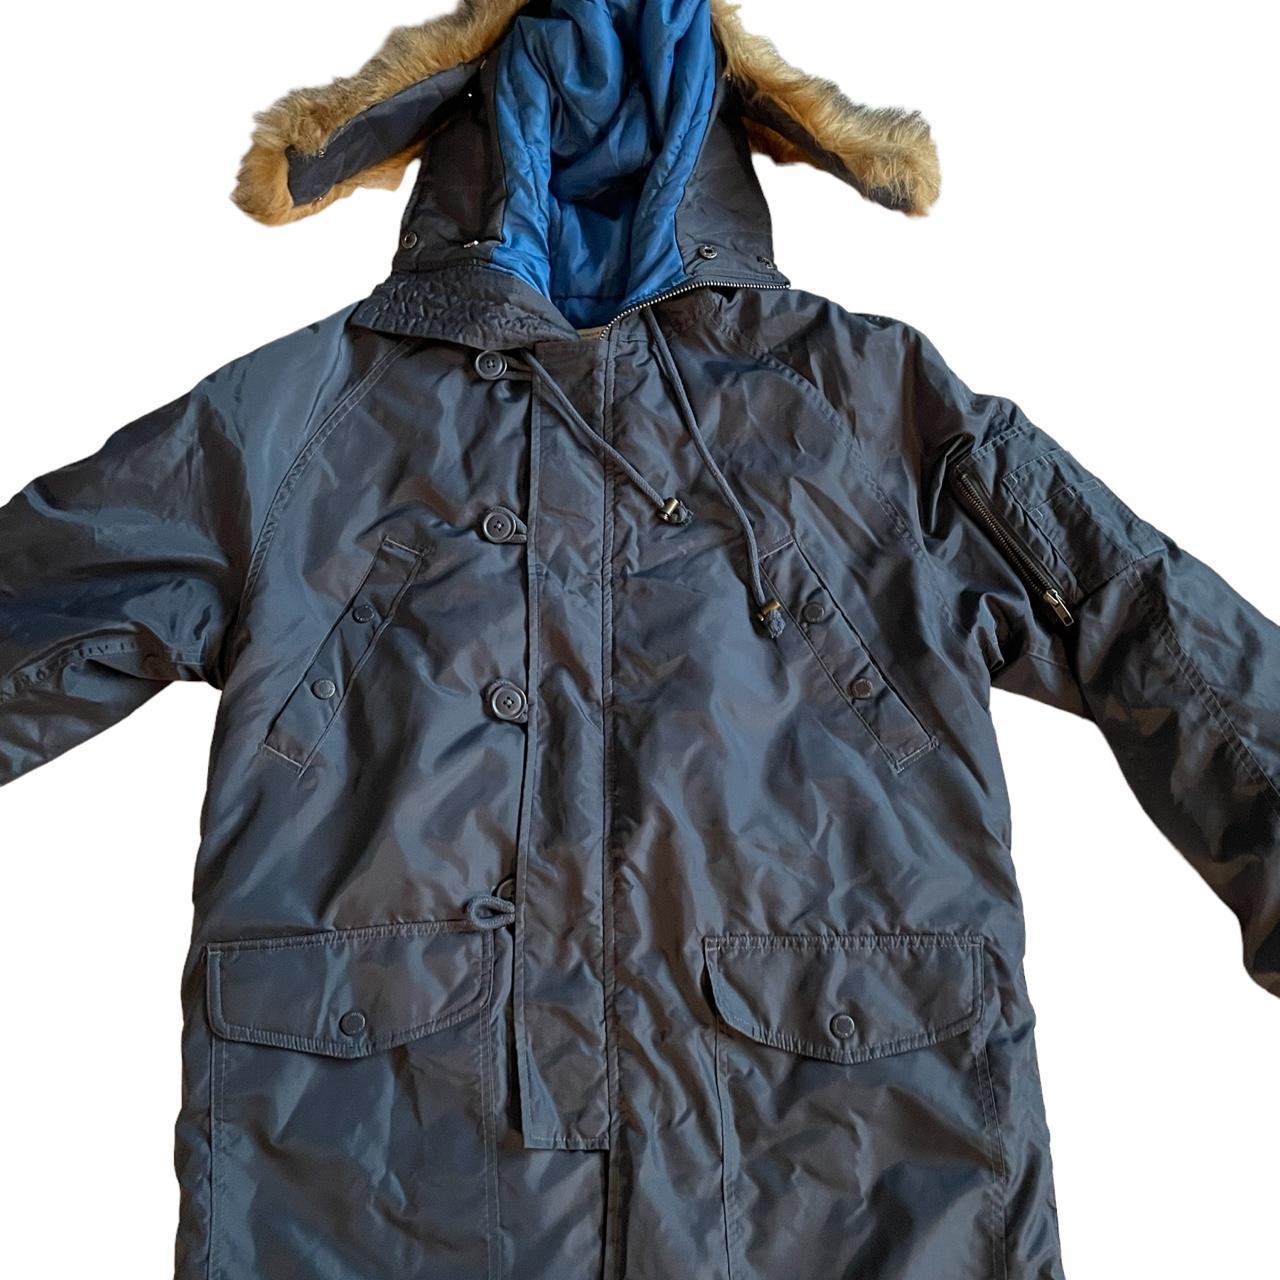 Product Image 1 - Final markdown!!
NATIVE YOUTH Men's Waterproof